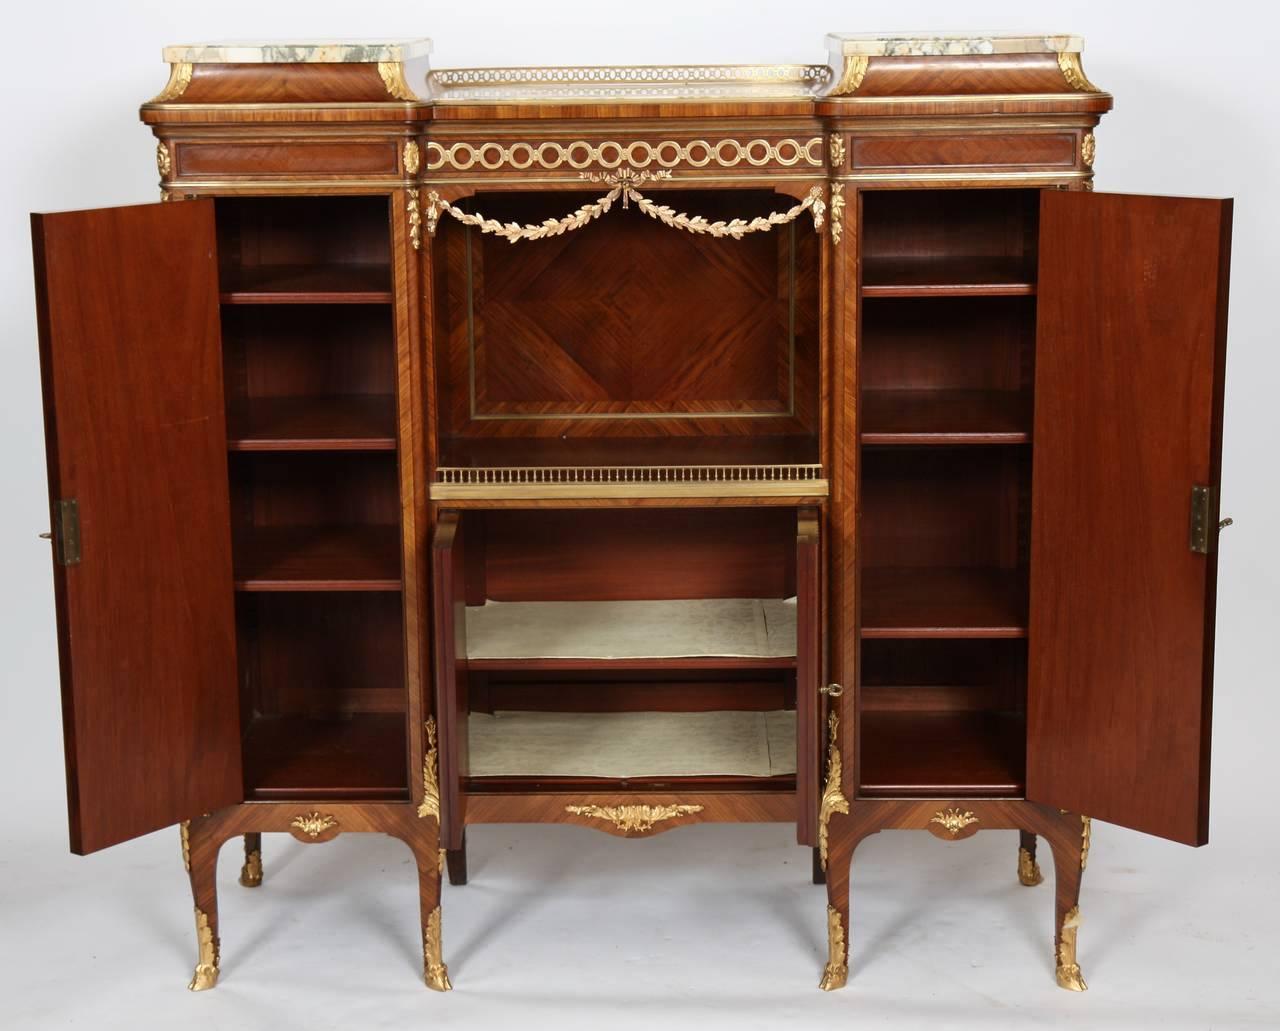 A Louis XV-style inlaid music cabinet by François Linke, a renowned Parisian ébéniste during the late 19th and early 20th centuries.

The cabinet is comprised of three sections, a center section with lower "tambour" doors which open